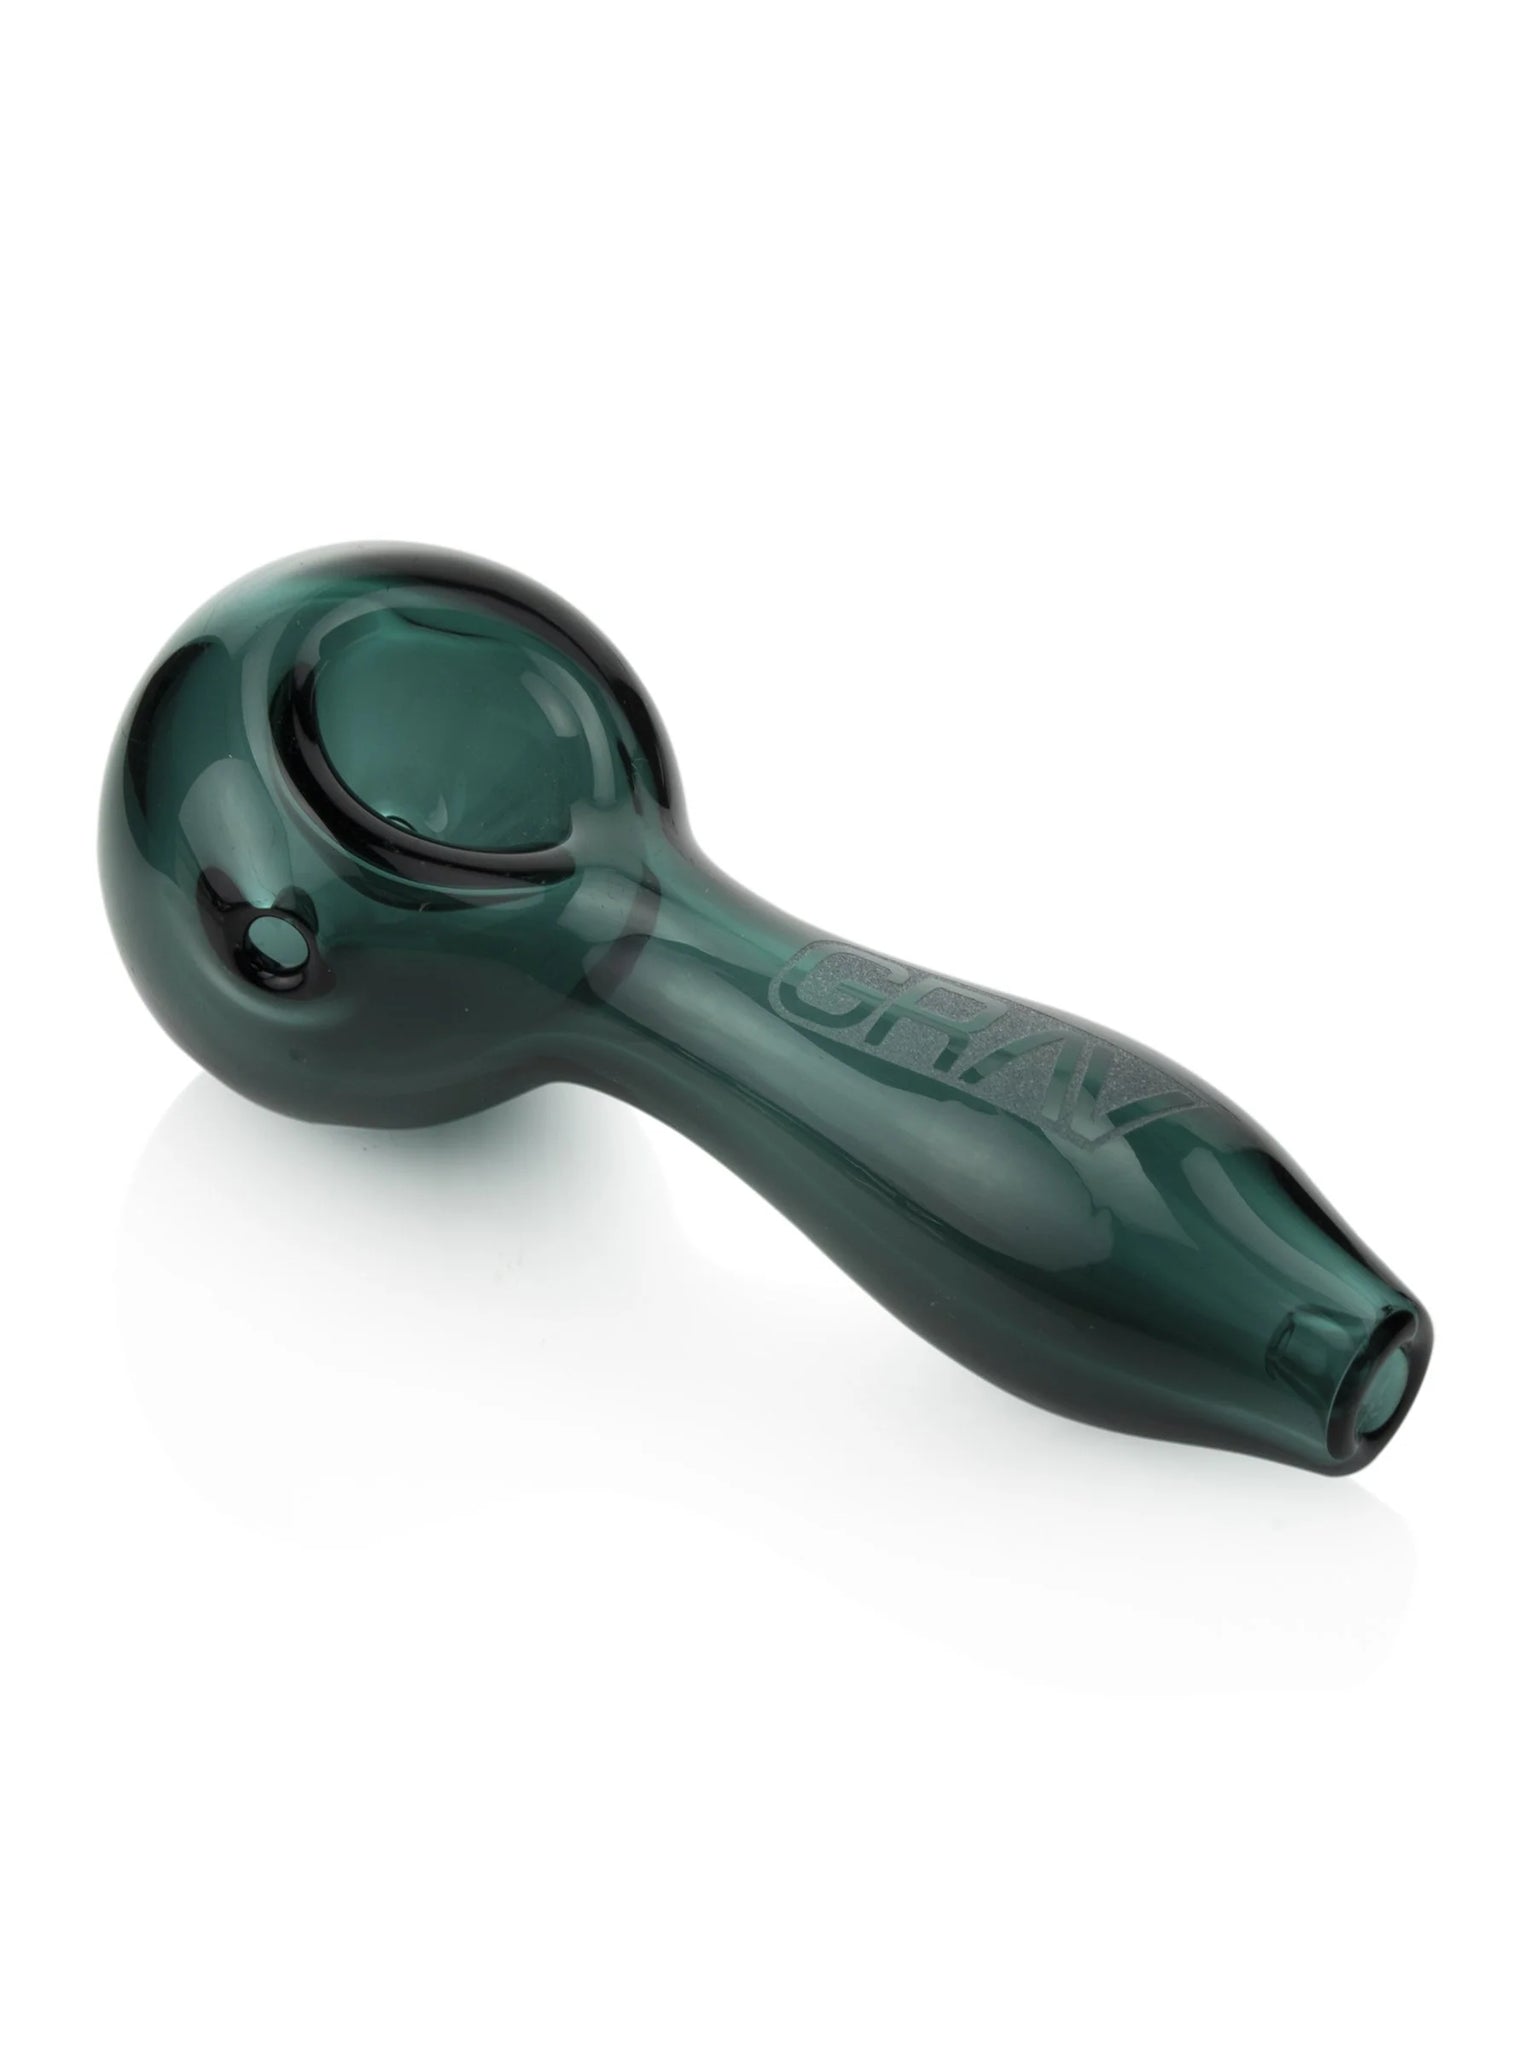 CLASSIC SPOON PIPE by GRAV®